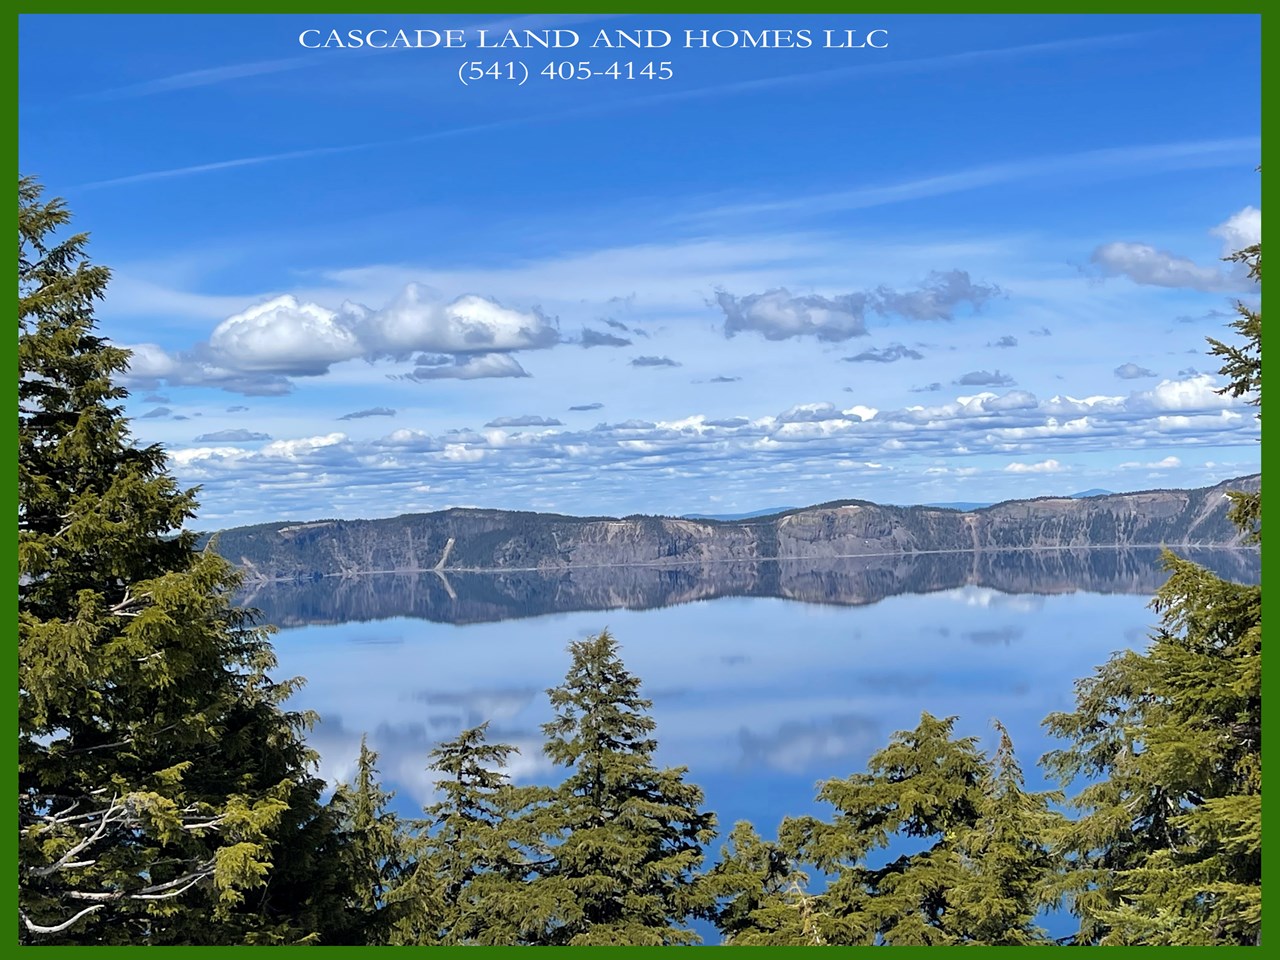 crater lake national park is only about 45 minutes away! there is unlimitied outdoor recreation here, and the cascade mountains offer many lakes and rivers, opportunities for hiking, swimming, mountain biking, horseback riding or just enjoying the clear mountain air.